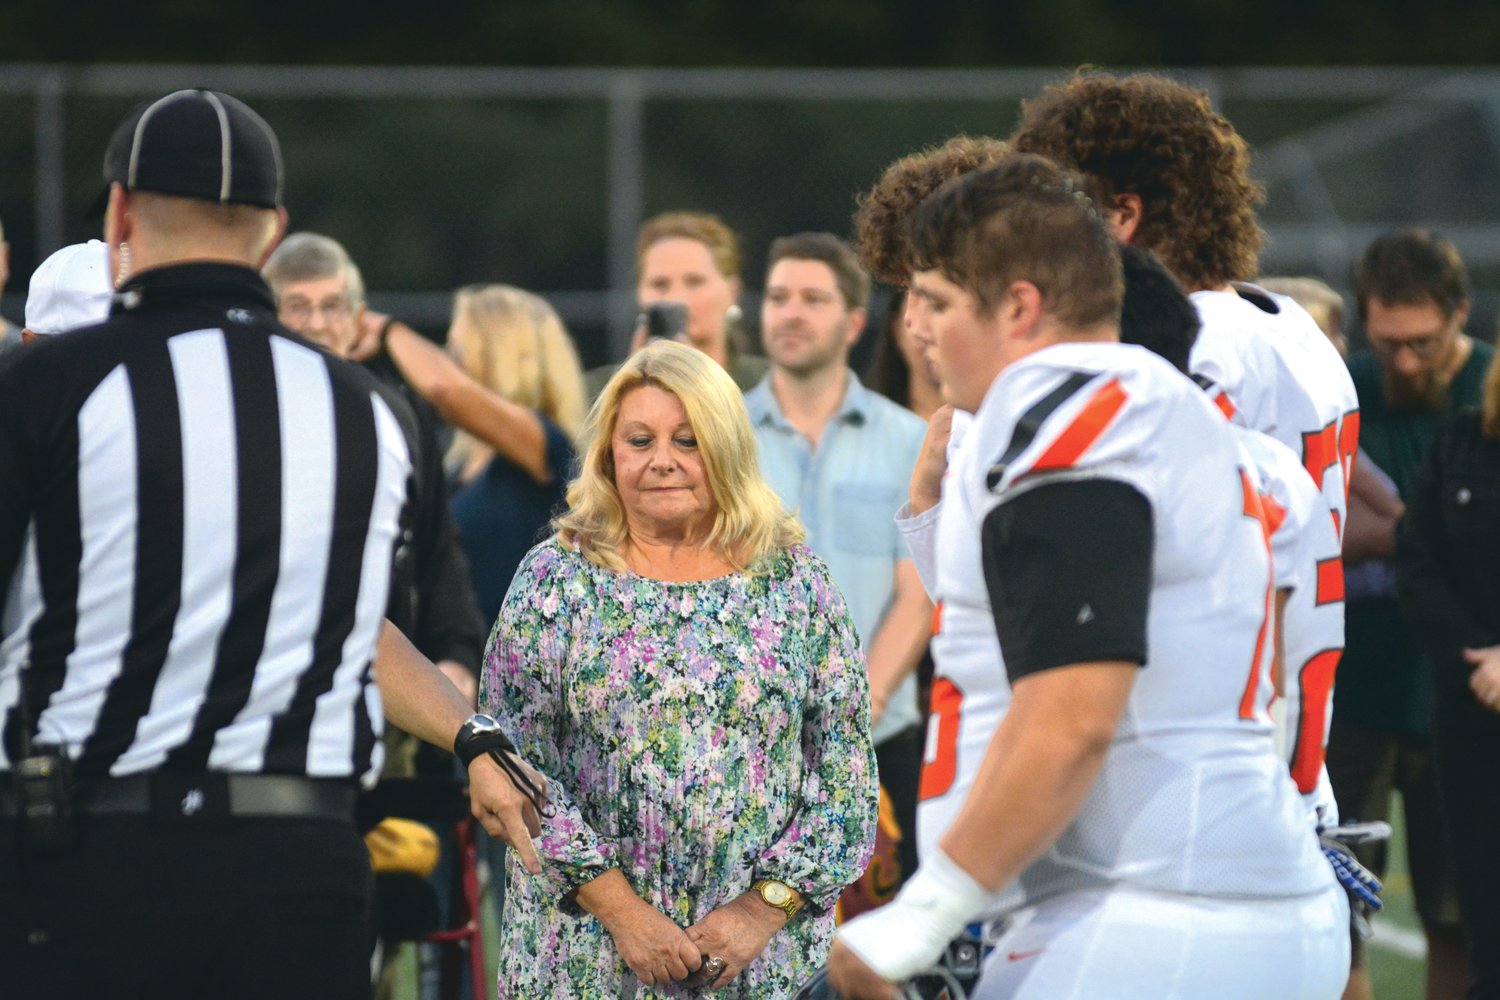 Jo Kain, who was a special guest for the coin flip, watches on as a coin falls to the ground on Sept. 29.